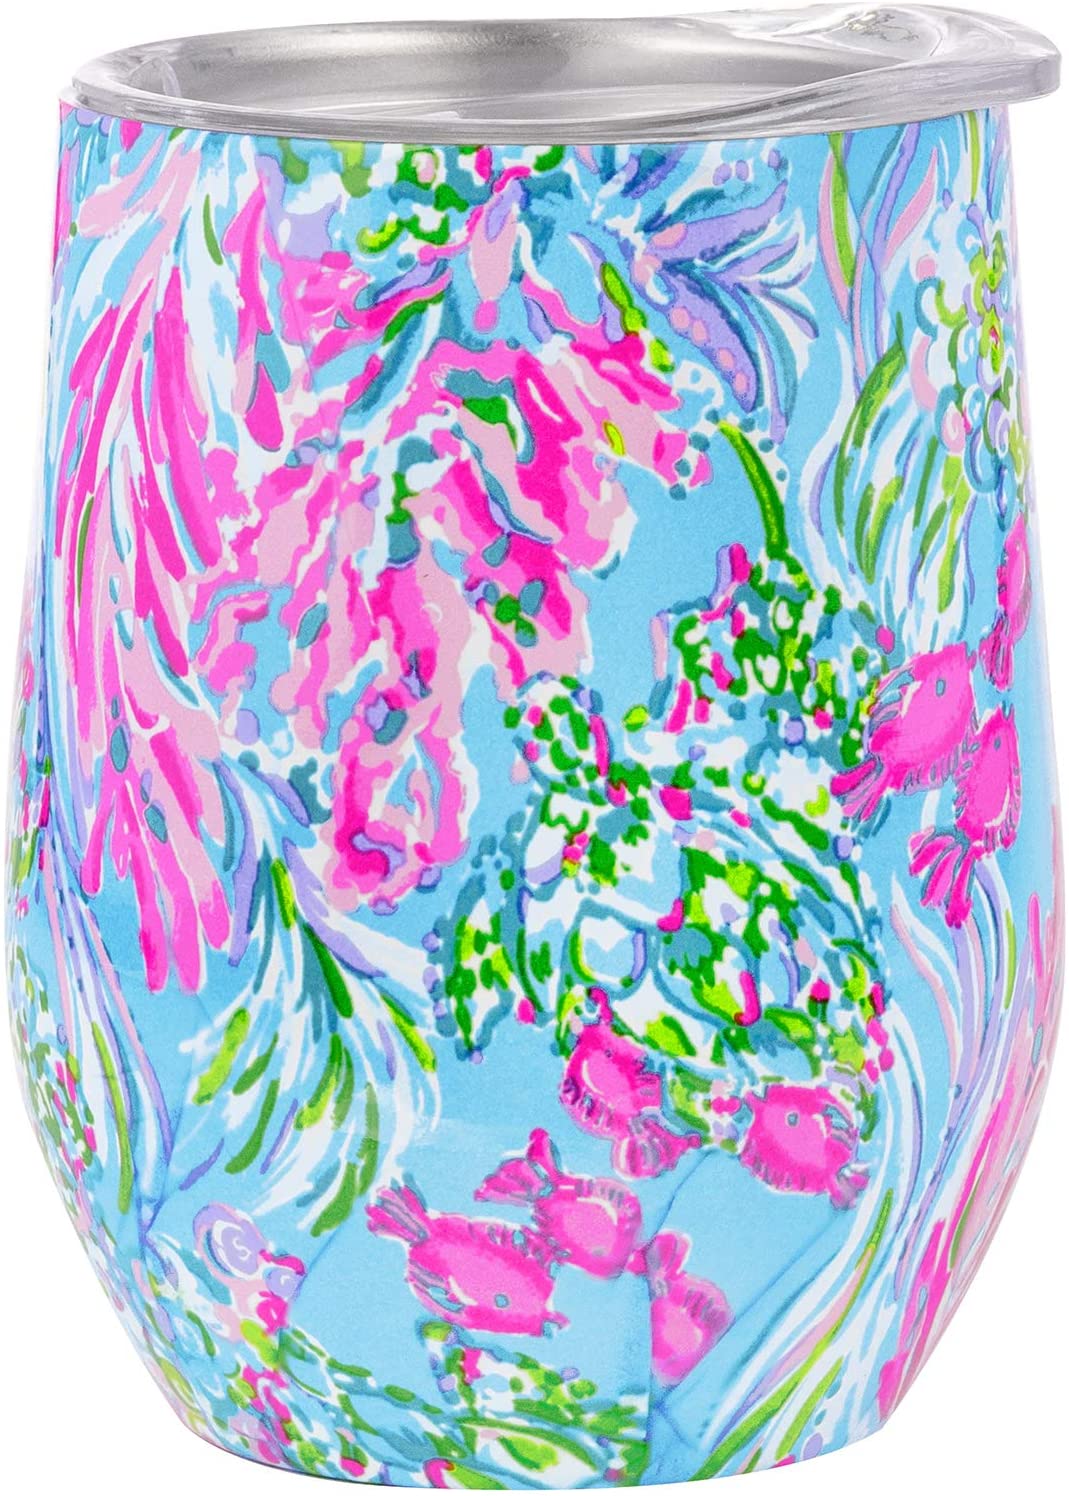  Lilly Pulitzer 12 Ounce Insulated Stemless Wine Tumbler